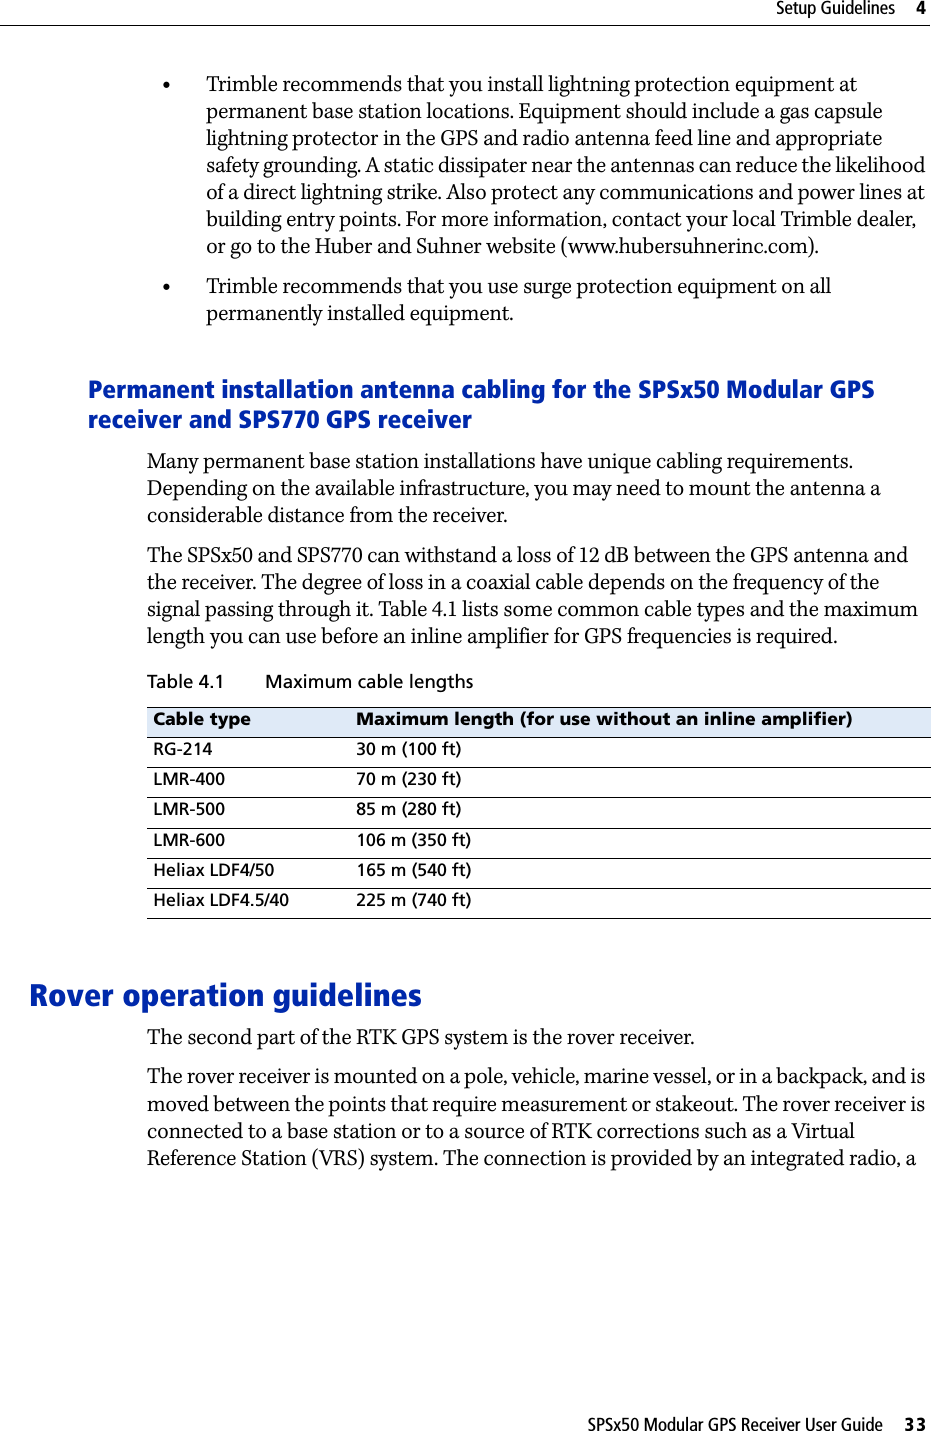 SPSx50 Modular GPS Receiver User Guide     33Setup Guidelines     4•Trimble recommends that you install lightning protection equipment at permanent base station locations. Equipment should include a gas capsule lightning protector in the GPS and radio antenna feed line and appropriate safety grounding. A static dissipater near the antennas can reduce the likelihood of a direct lightning strike. Also protect any communications and power lines at building entry points. For more information, contact your local Trimble dealer, or go to the Huber and Suhner website (www.hubersuhnerinc.com).•Trimble recommends that you use surge protection equipment on all permanently installed equipment.Permanent installation antenna cabling for the SPSx50 Modular GPS receiver and SPS770 GPS receiverMany permanent base station installations have unique cabling requirements. Depending on the available infrastructure, you may need to mount the antenna a considerable distance from the receiver.The SPSx50 and SPS770 can withstand a loss of 12 dB between the GPS antenna and the receiver. The degree of loss in a coaxial cable depends on the frequency of the signal passing through it. Table 4.1 lists some common cable types and the maximum length you can use before an inline amplifier for GPS frequencies is required.Rover operation guidelinesThe second part of the RTK GPS system is the rover receiver.The rover receiver is mounted on a pole, vehicle, marine vessel, or in a backpack, and is moved between the points that require measurement or stakeout. The rover receiver is connected to a base station or to a source of RTK corrections such as a Virtual Reference Station (VRS) system. The connection is provided by an integrated radio, a Table 4.1 Maximum cable lengthsCable type Maximum length (for use without an inline amplifier)RG-214 30 m (100 ft)LMR-400 70 m (230 ft)LMR-500 85 m (280 ft)LMR-600 106 m (350 ft)Heliax LDF4/50 165 m (540 ft)Heliax LDF4.5/40 225 m (740 ft)